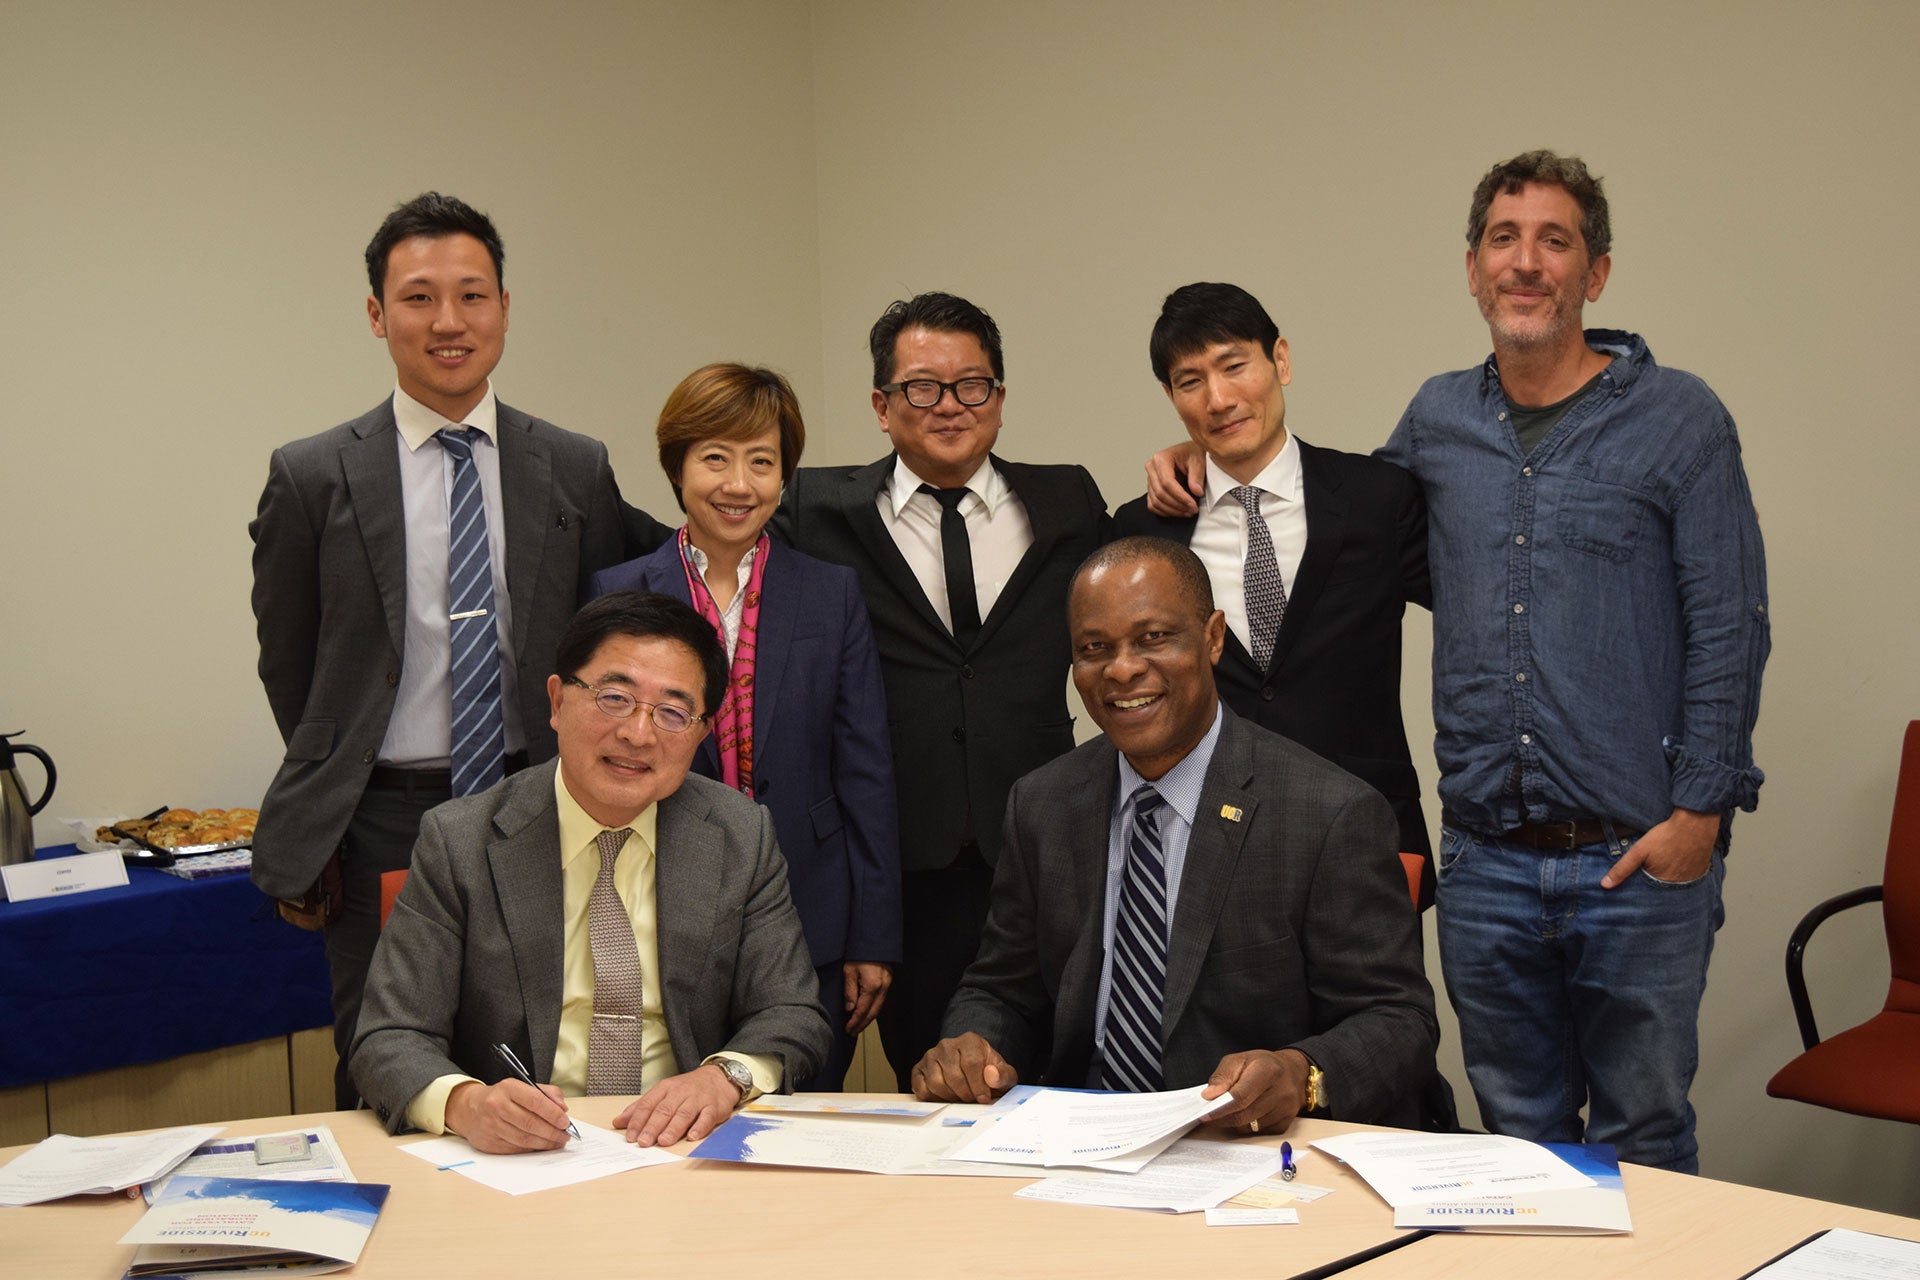 Representatives from TUFS and UCR sign agreement